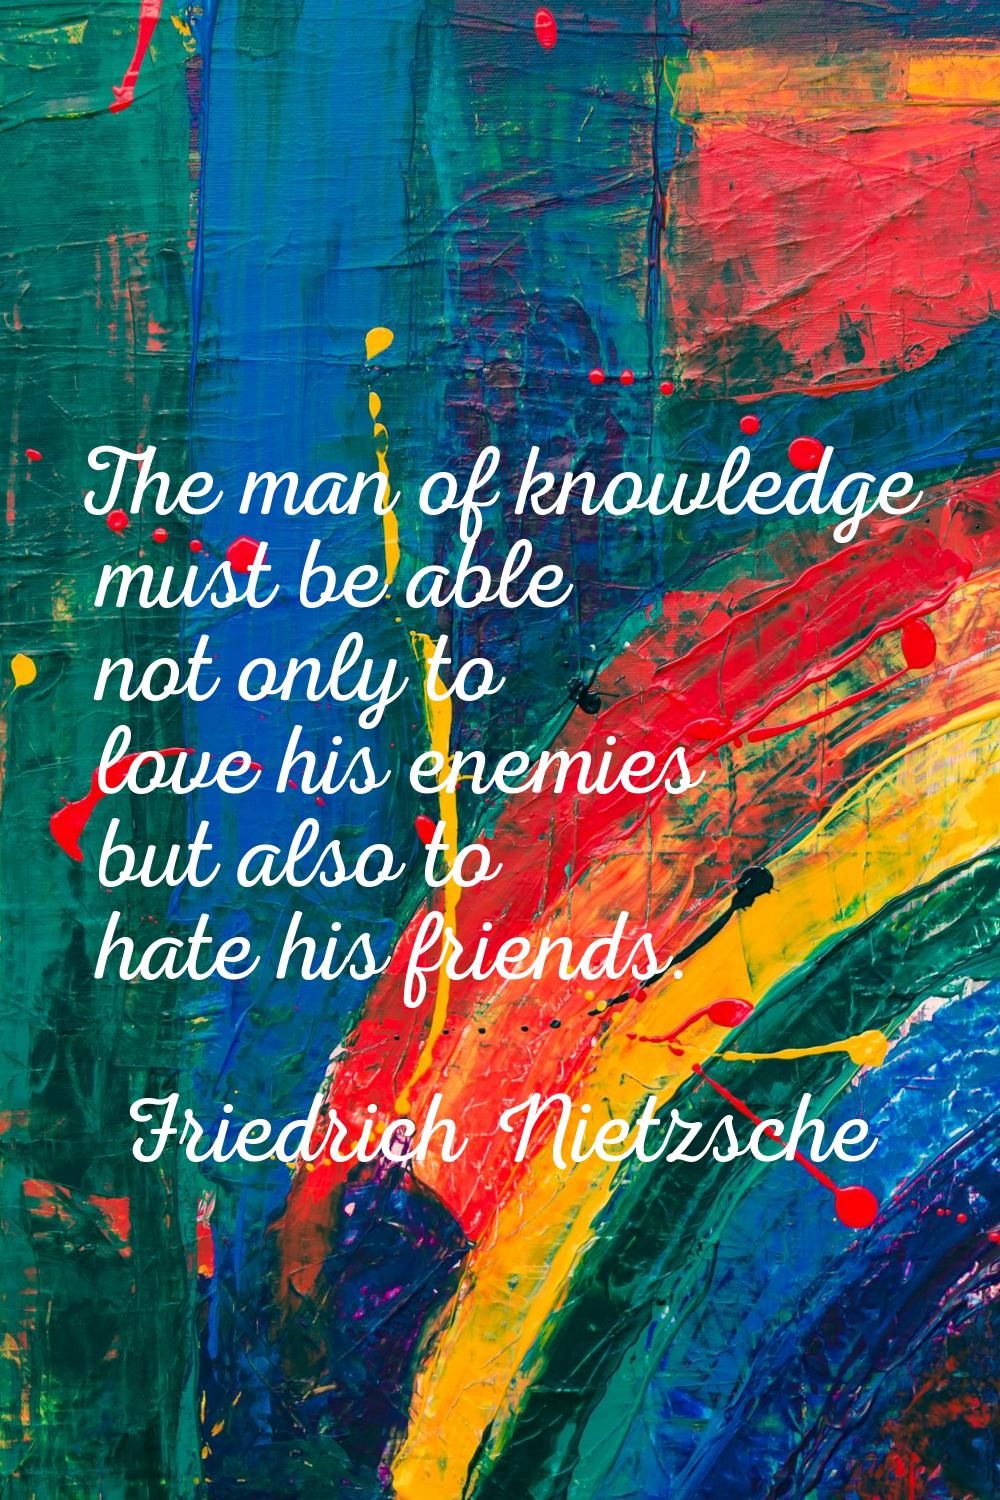 The man of knowledge must be able not only to love his enemies but also to hate his friends.